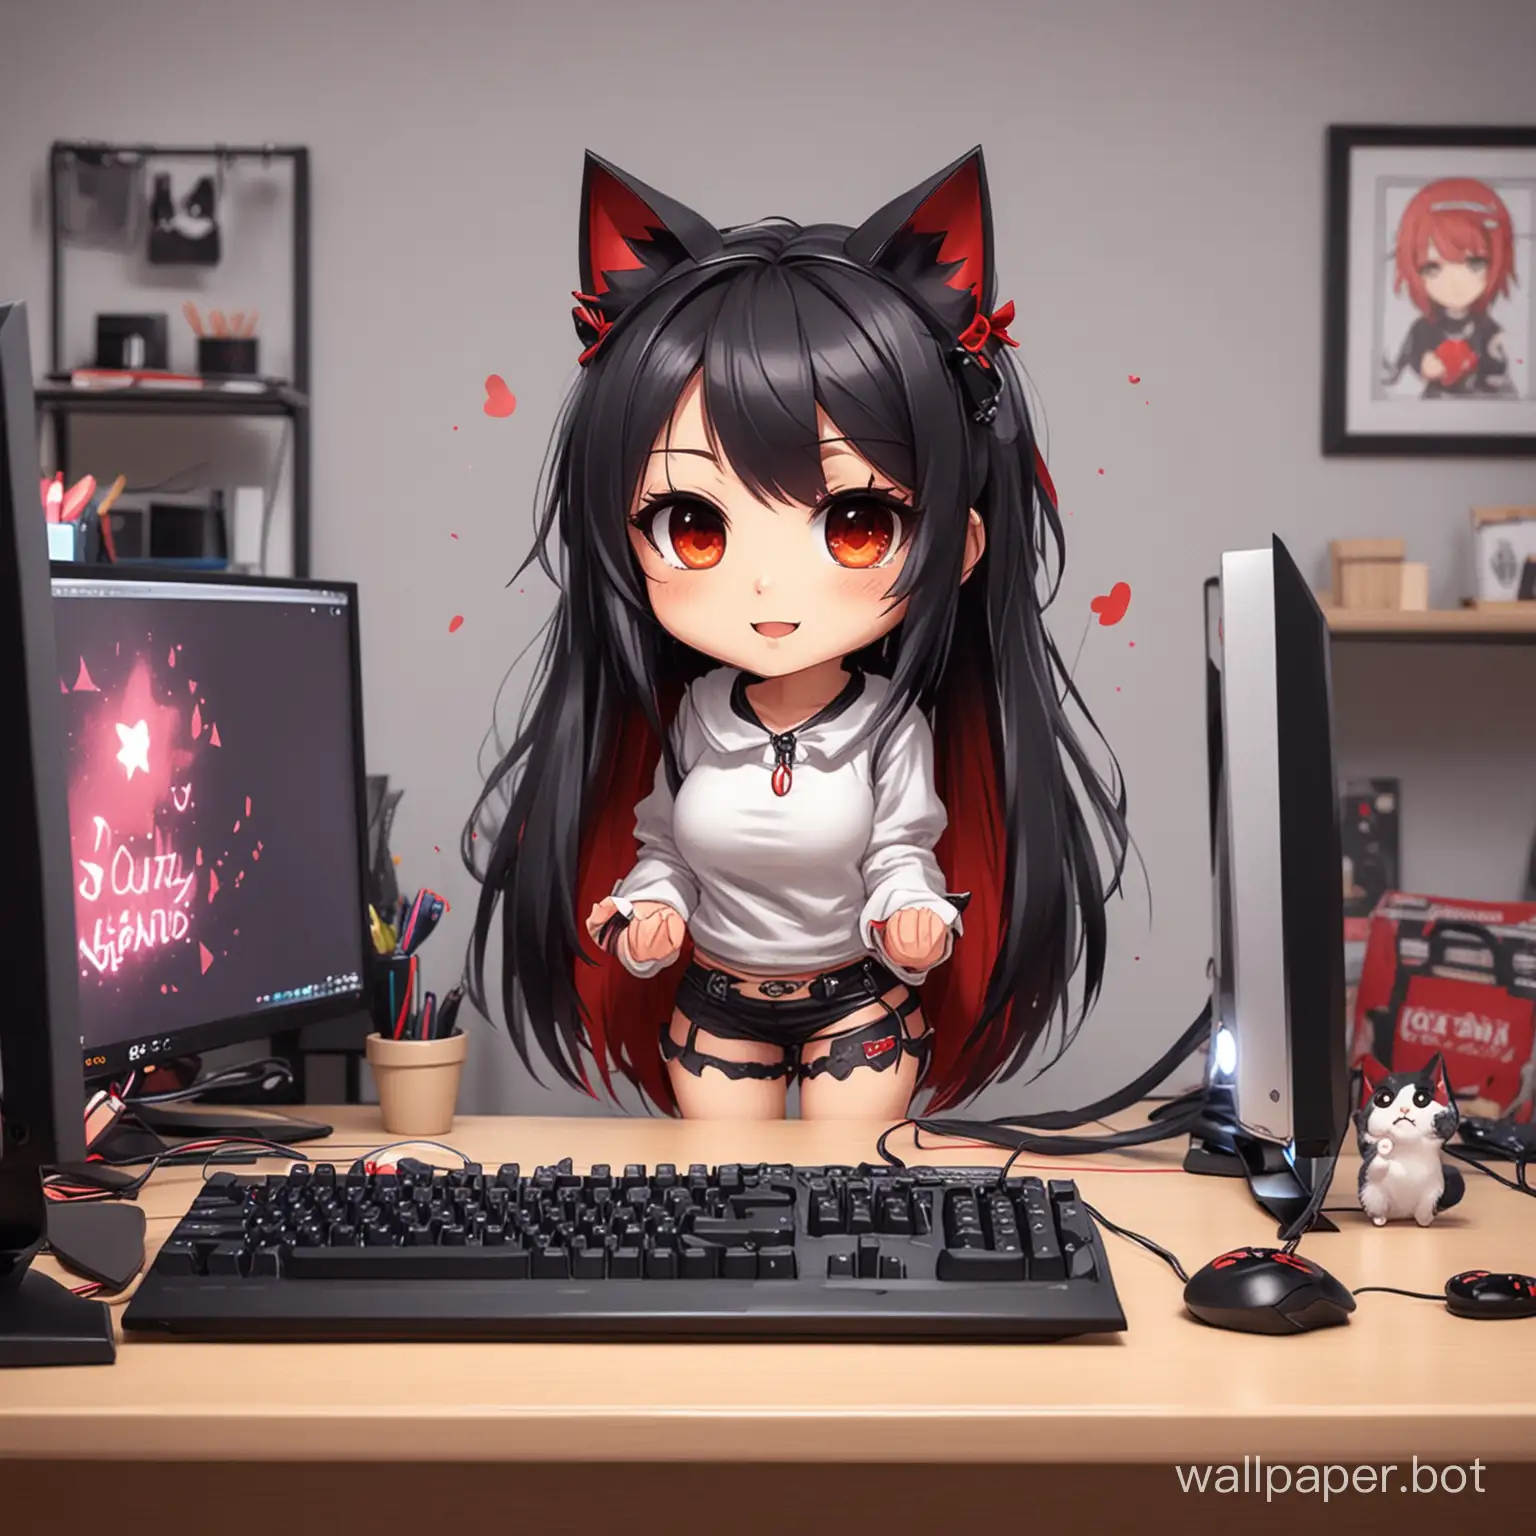 Cheerful-Chibi-Gamer-Girl-Streaming-with-Cat-Ears-on-HighTech-PC